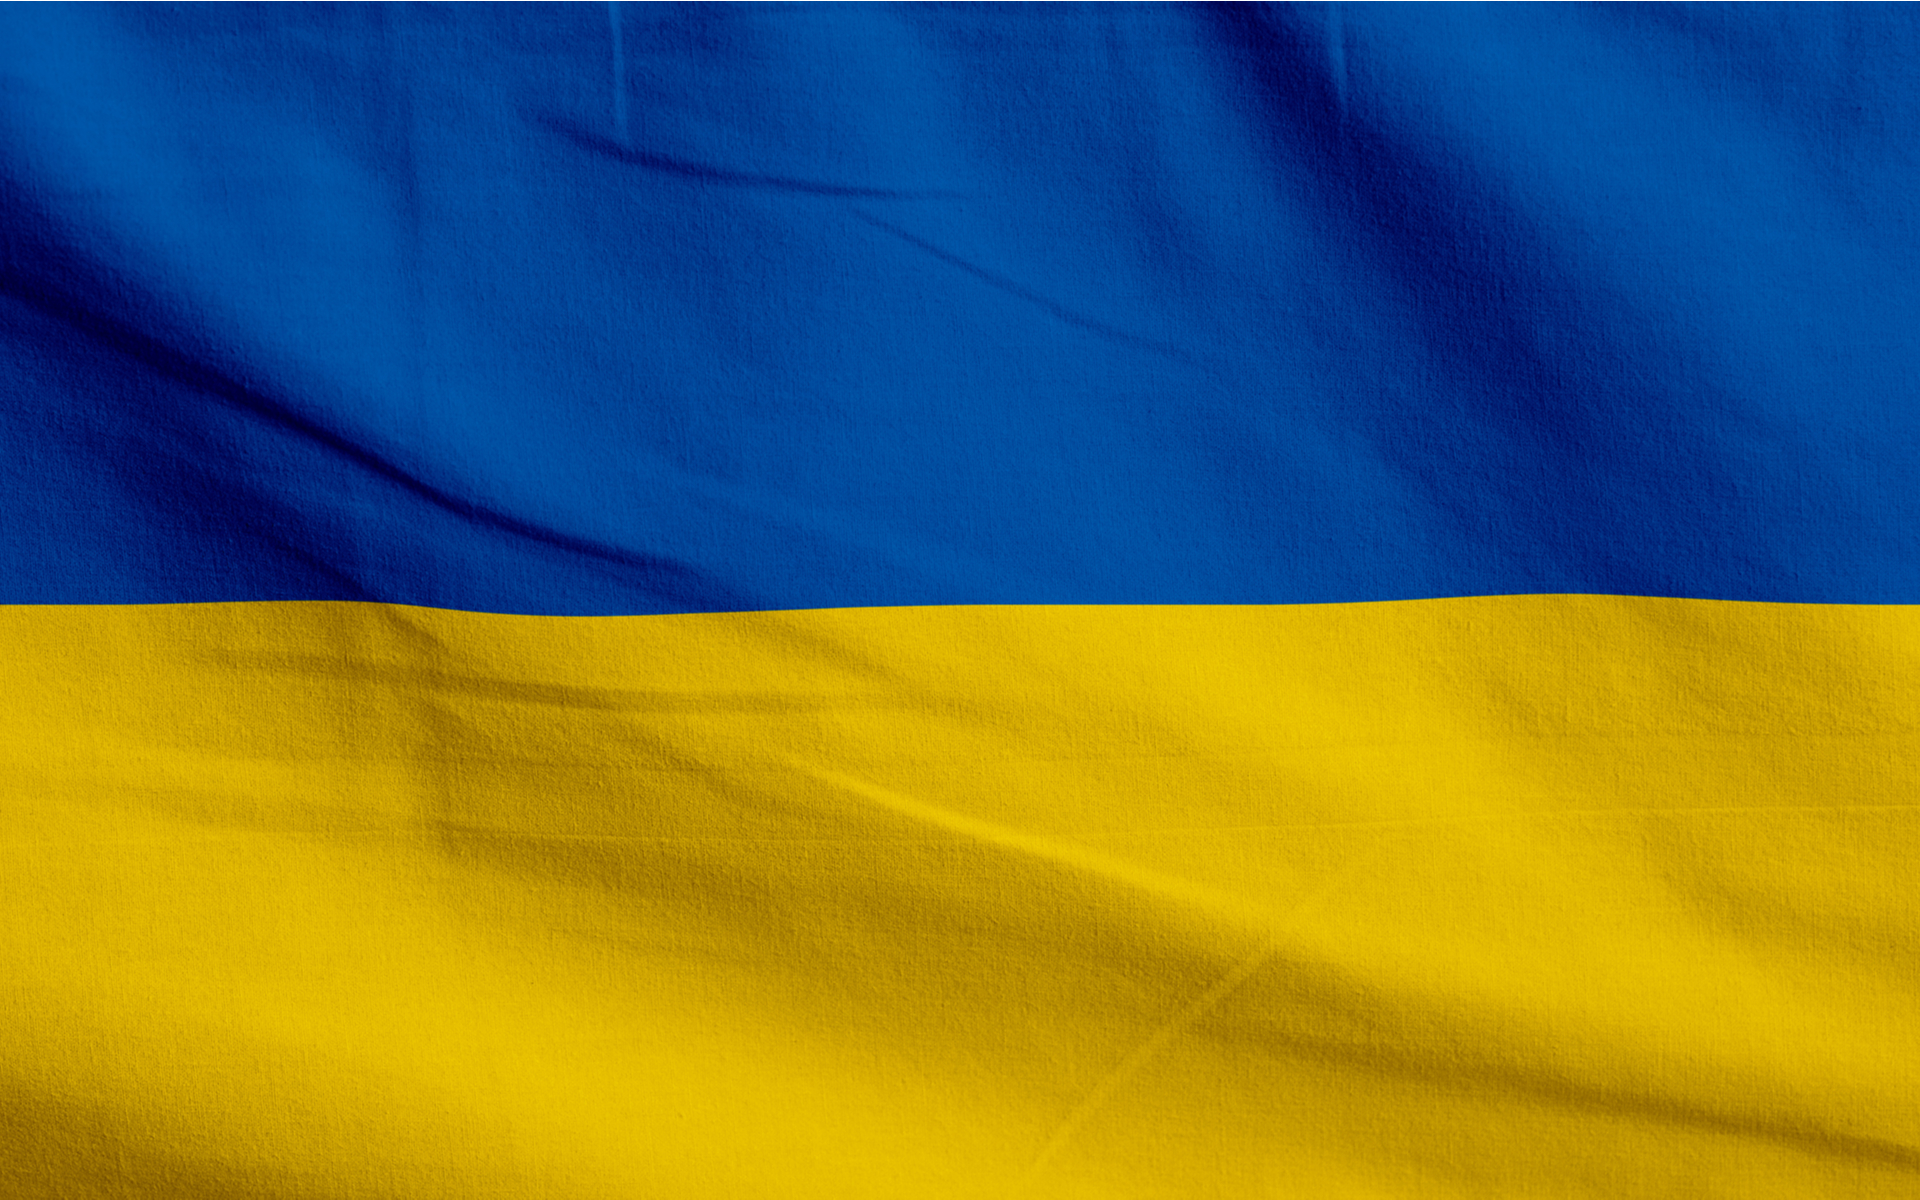 Ukraine Releases Guide on How to Declare Crypto Holdings